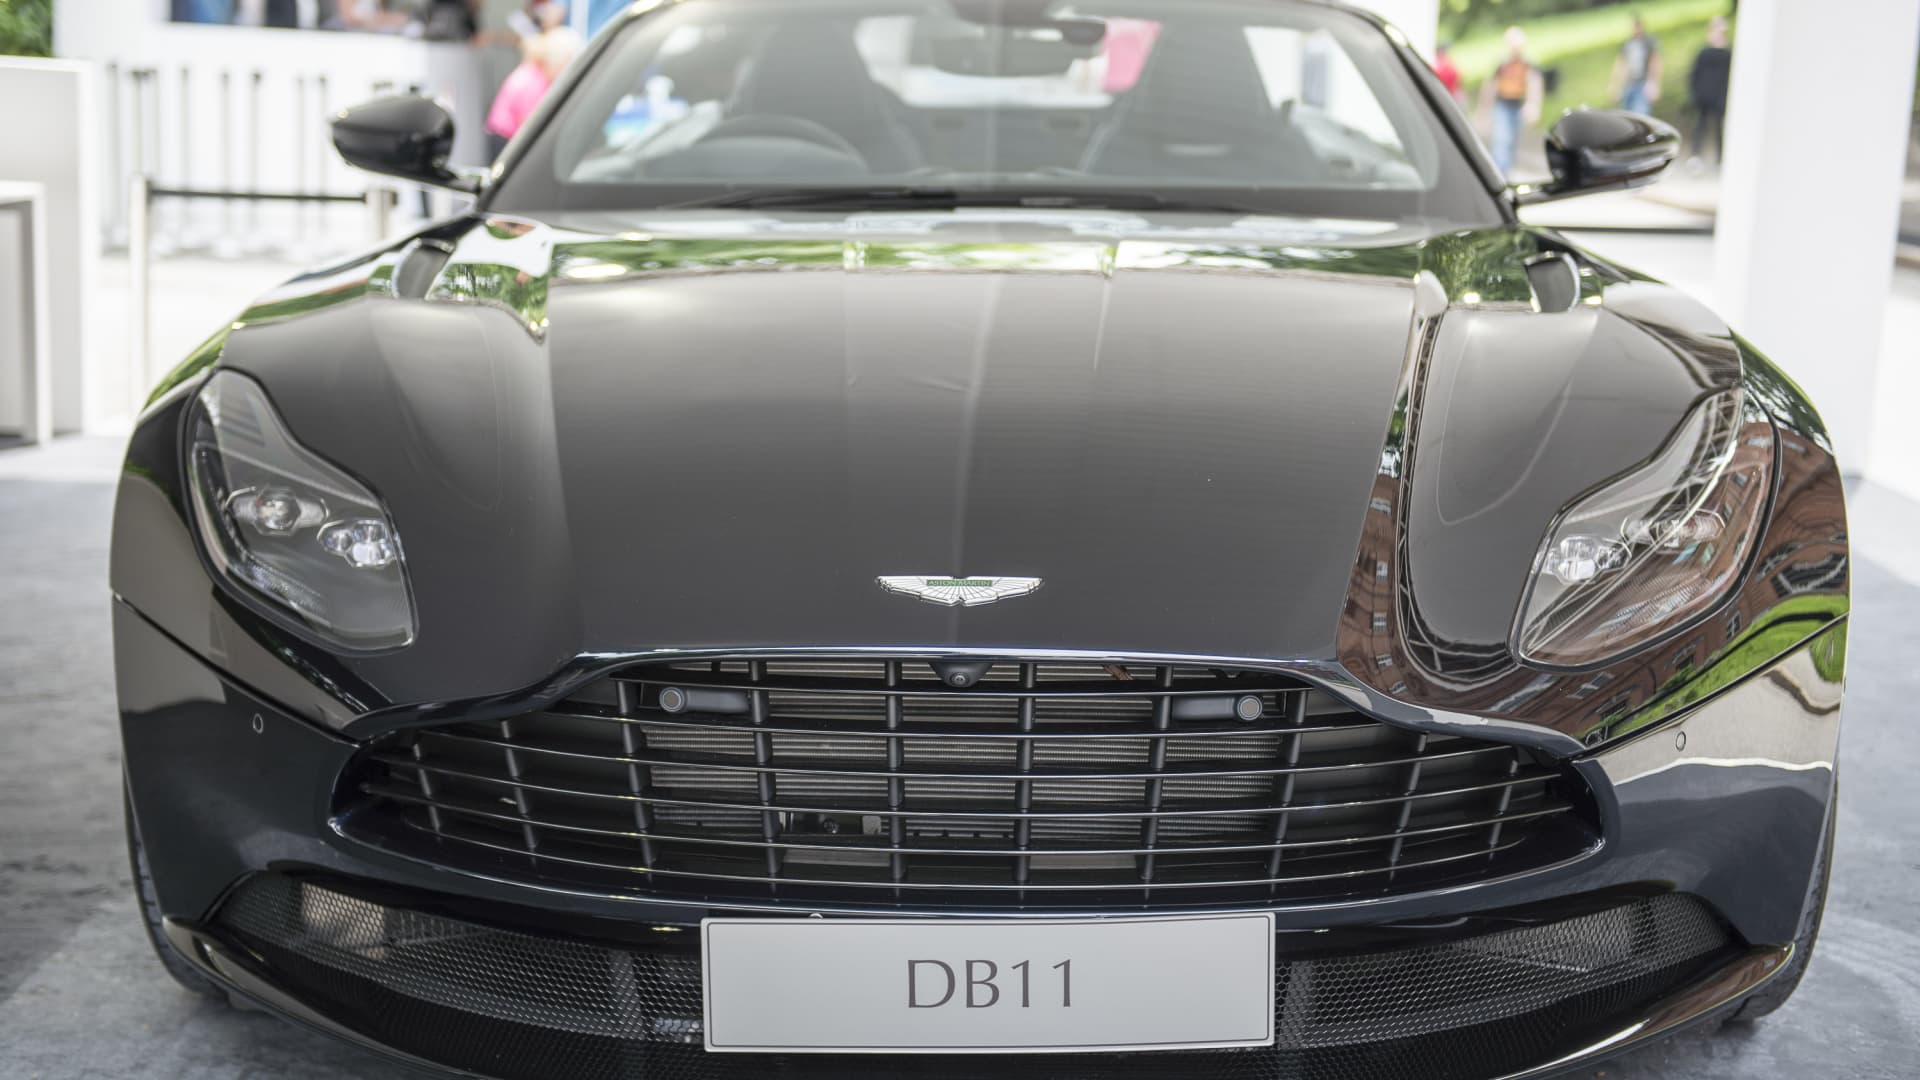 Aston Martin's losses nearly doubled on lower sales, but carmaker projects growth from new models